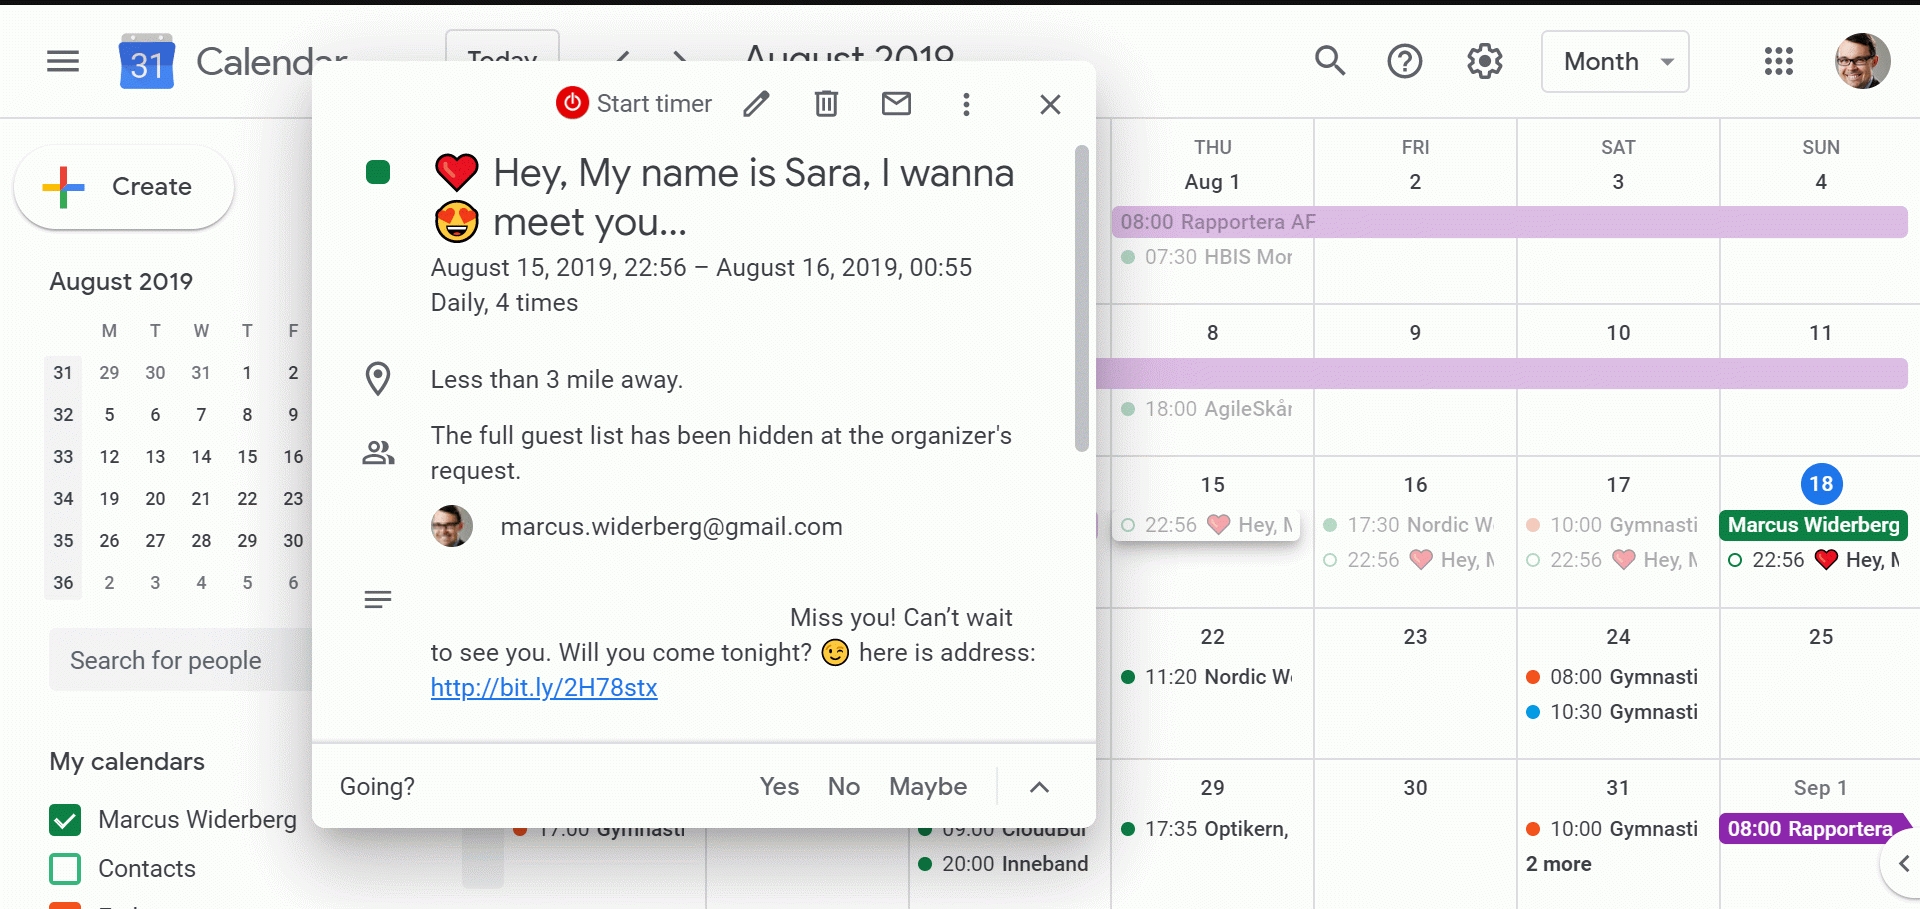 Calendar Hacked? Spam Appears Despite Not Adding Events